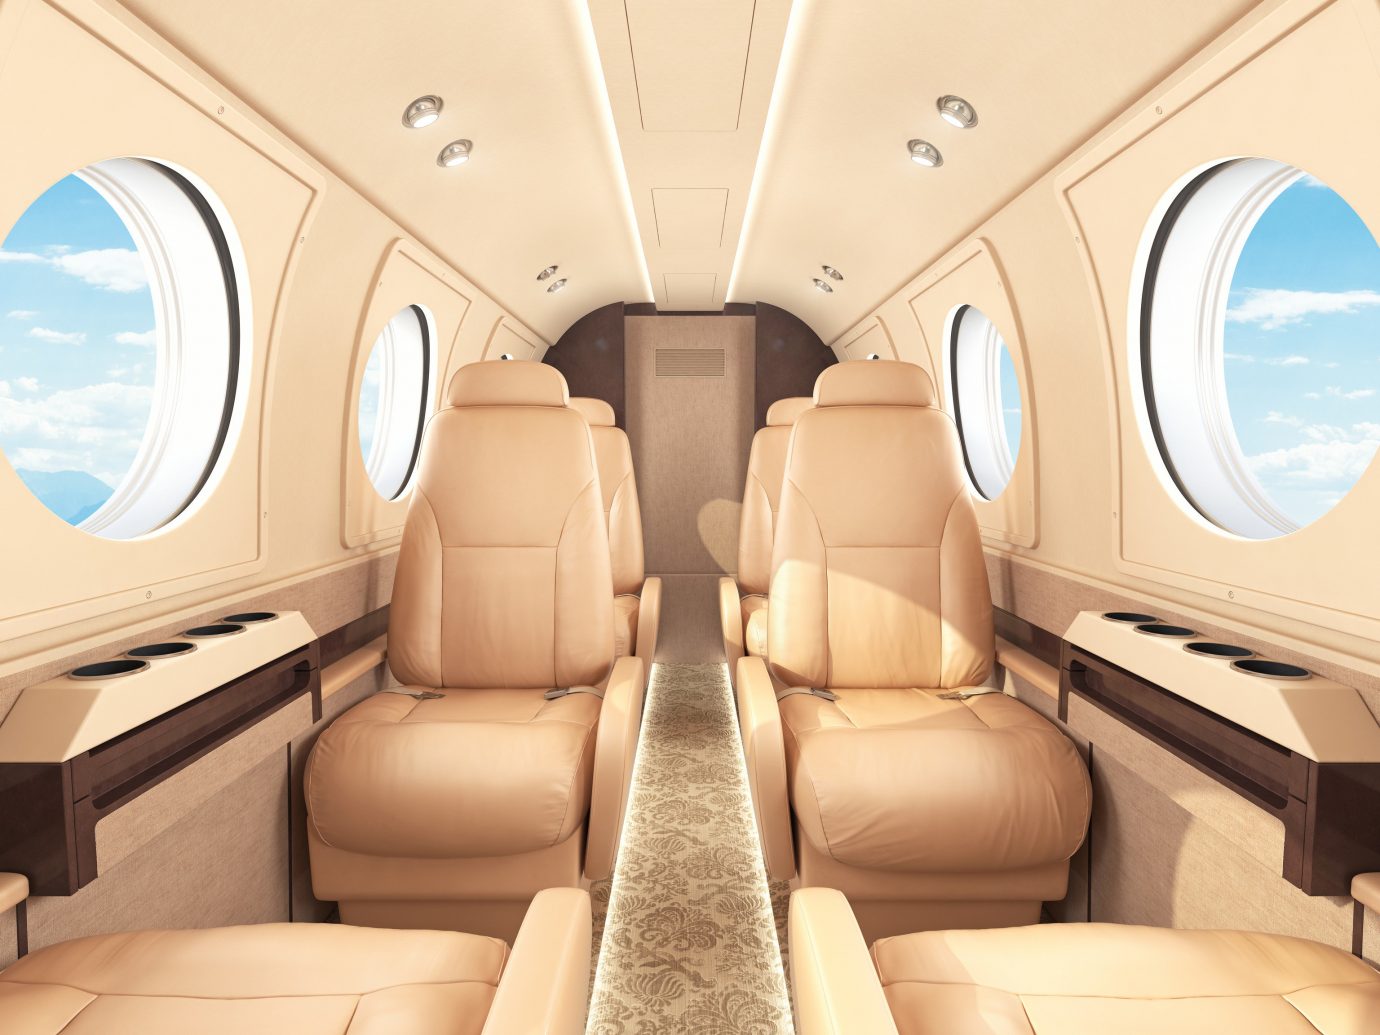 Flights Travel Tips sofa indoor Cabin airline air travel vehicle aircraft cabin scene business jet aviation furniture